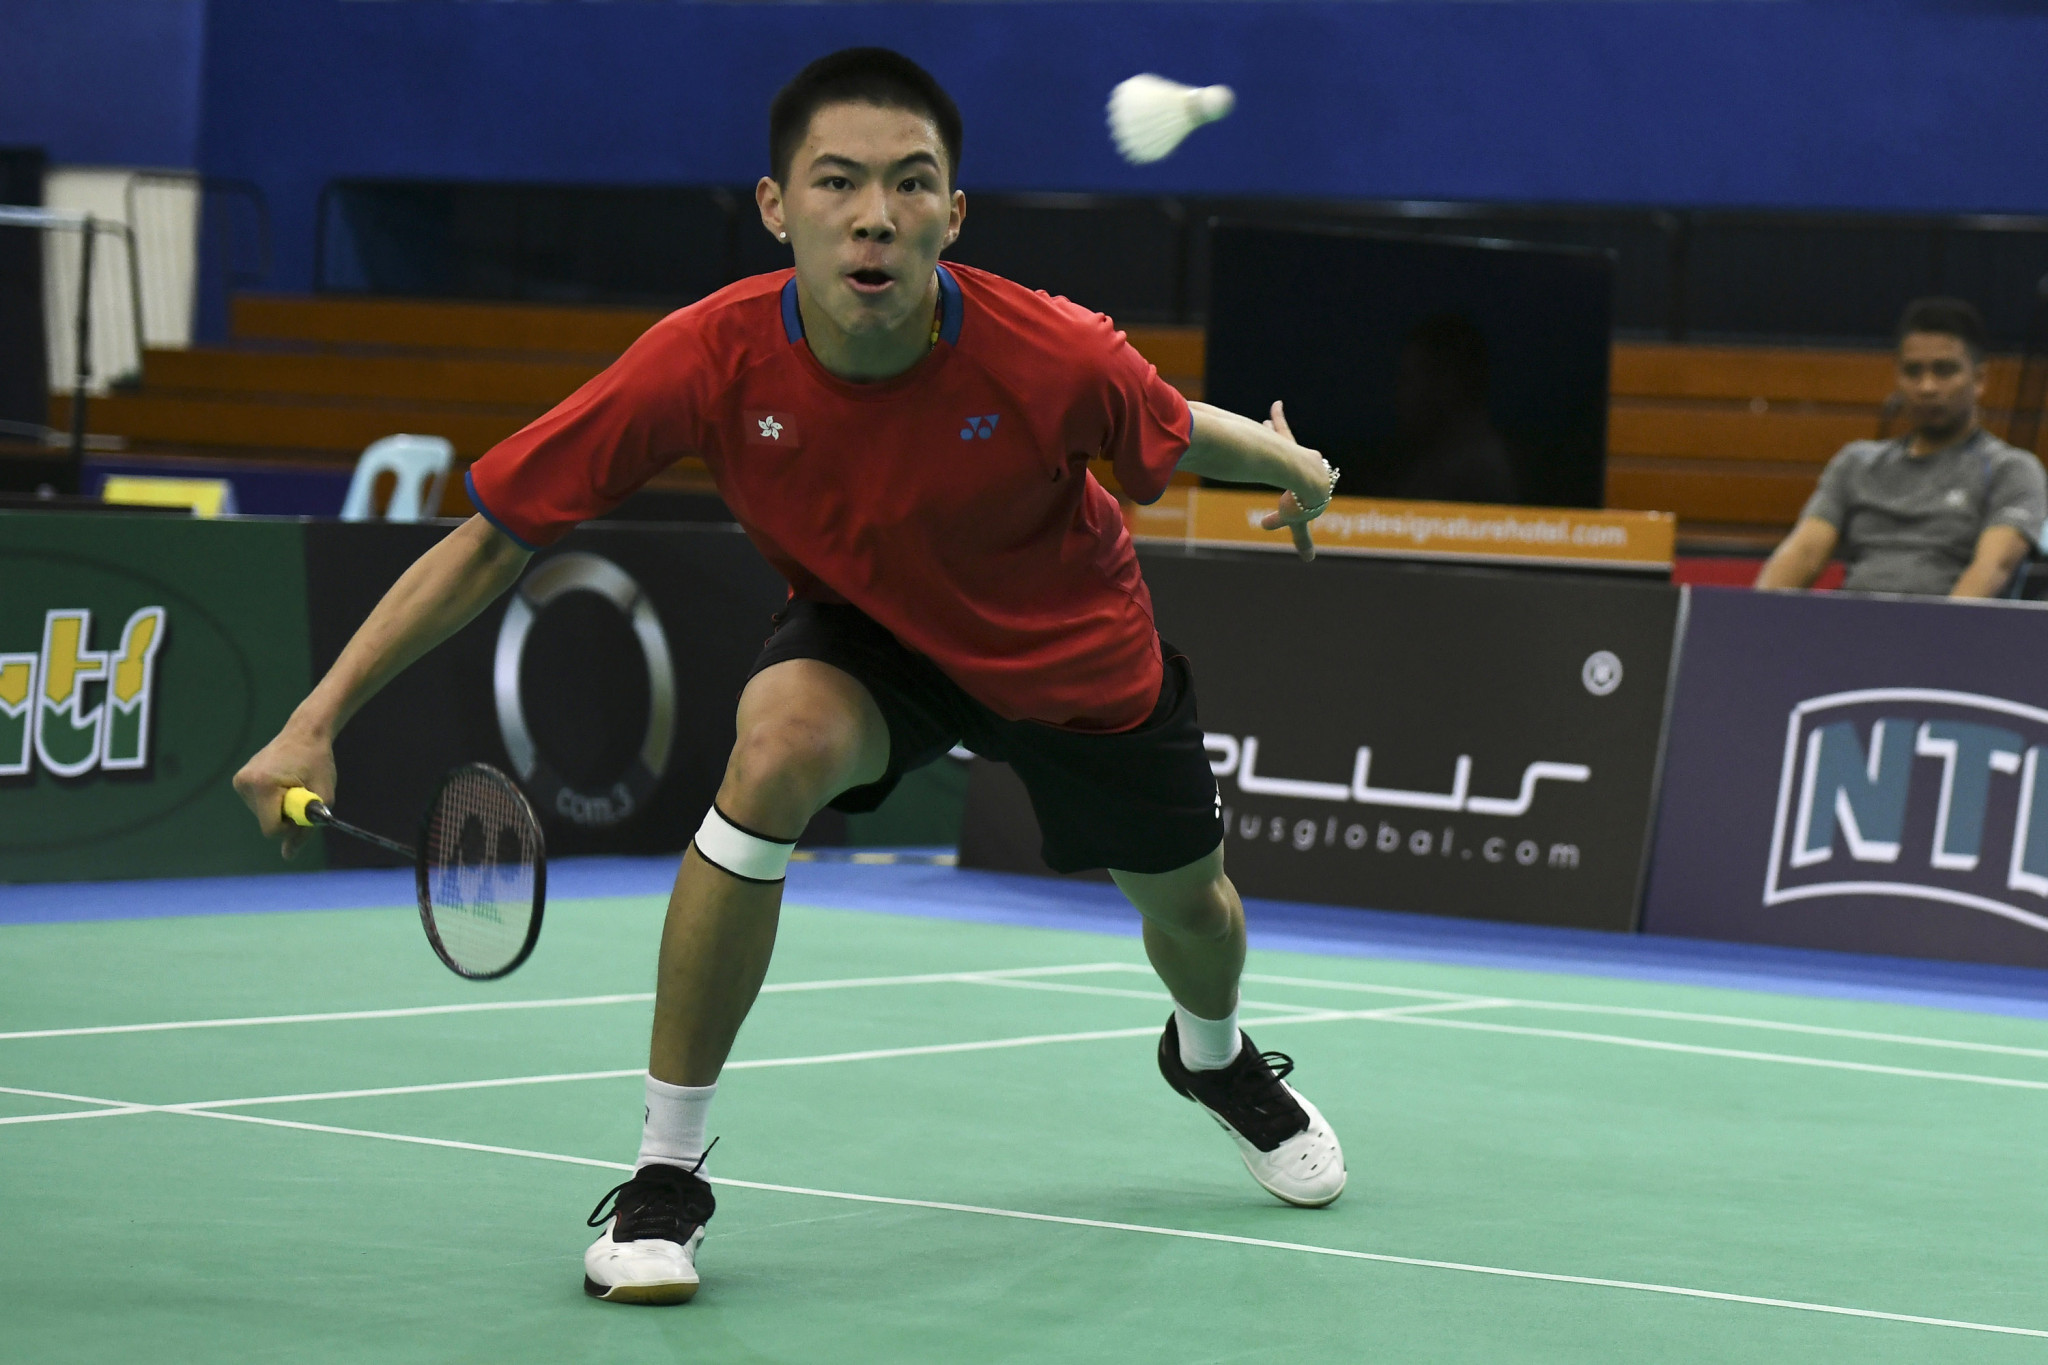 Hong Kong’s Lee Cheuk Yiu has booked his place in the semi-finals of the men’s singles event at the BWF Australian Open in Sydney ©Getty Images